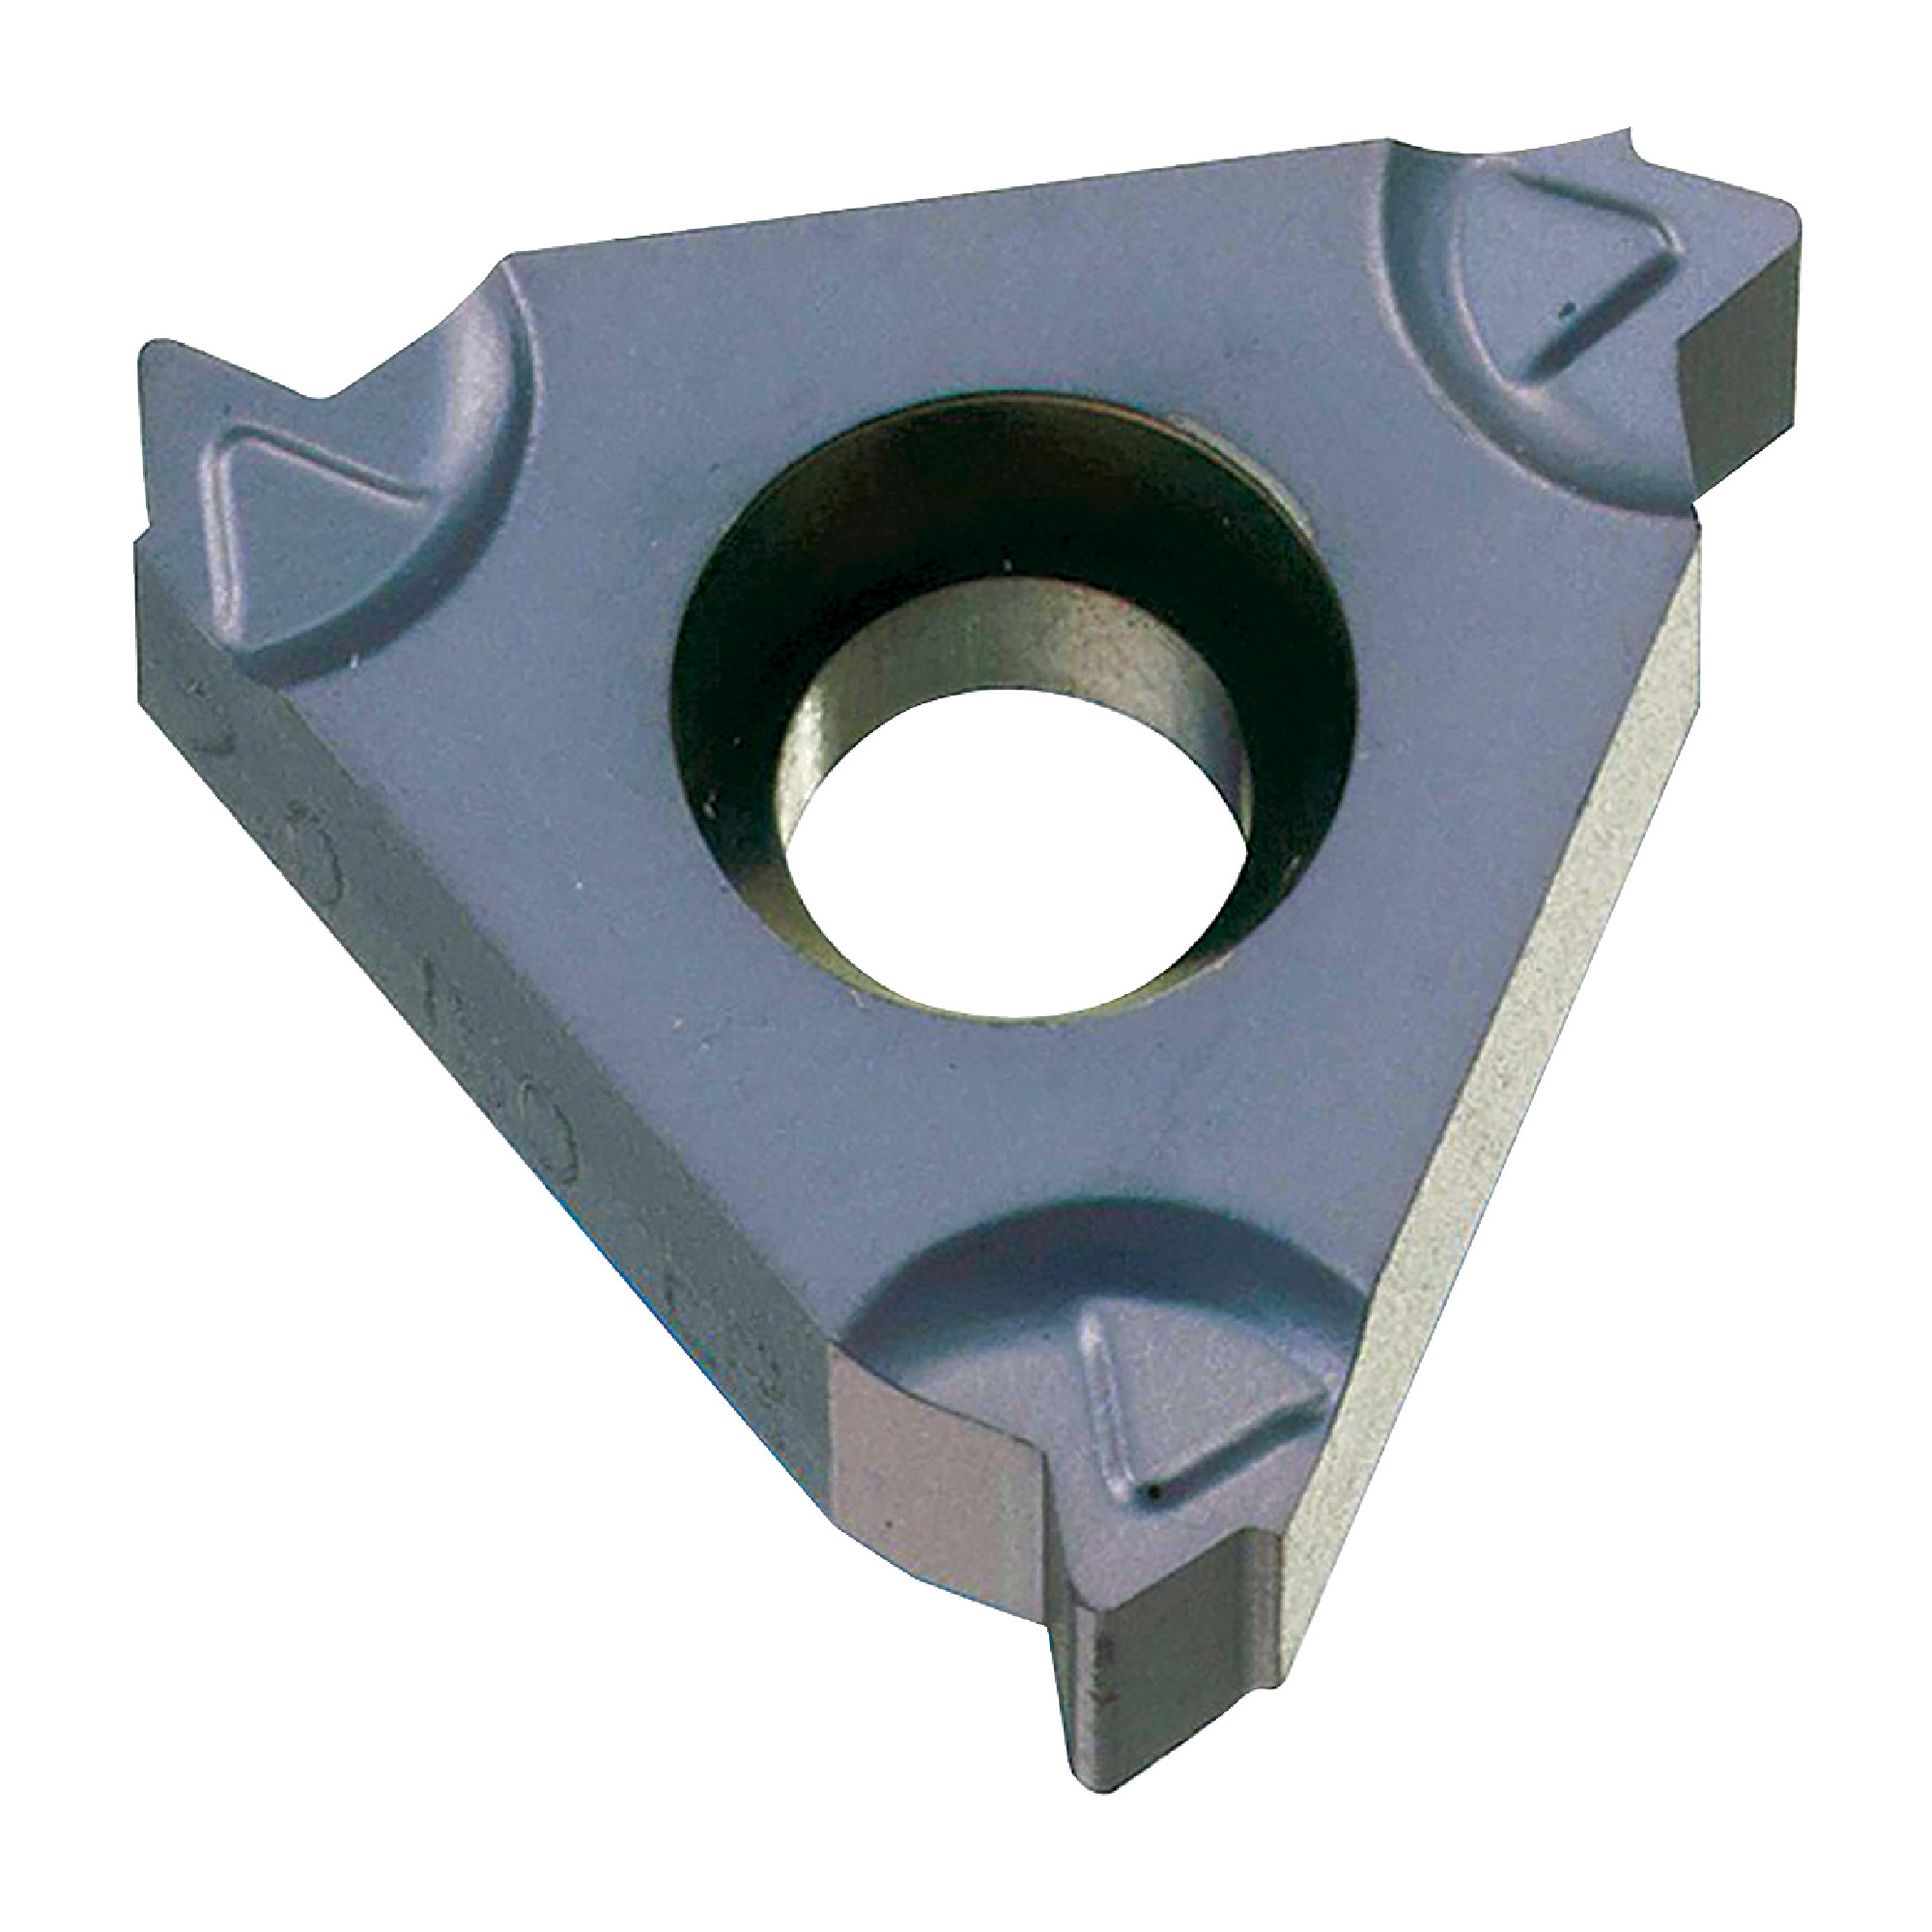 CARMEX - 11 IR A60 BMA / Indexable Threading Insert / A60 Pitch / 16-48 TPI / Internal / Right Hand